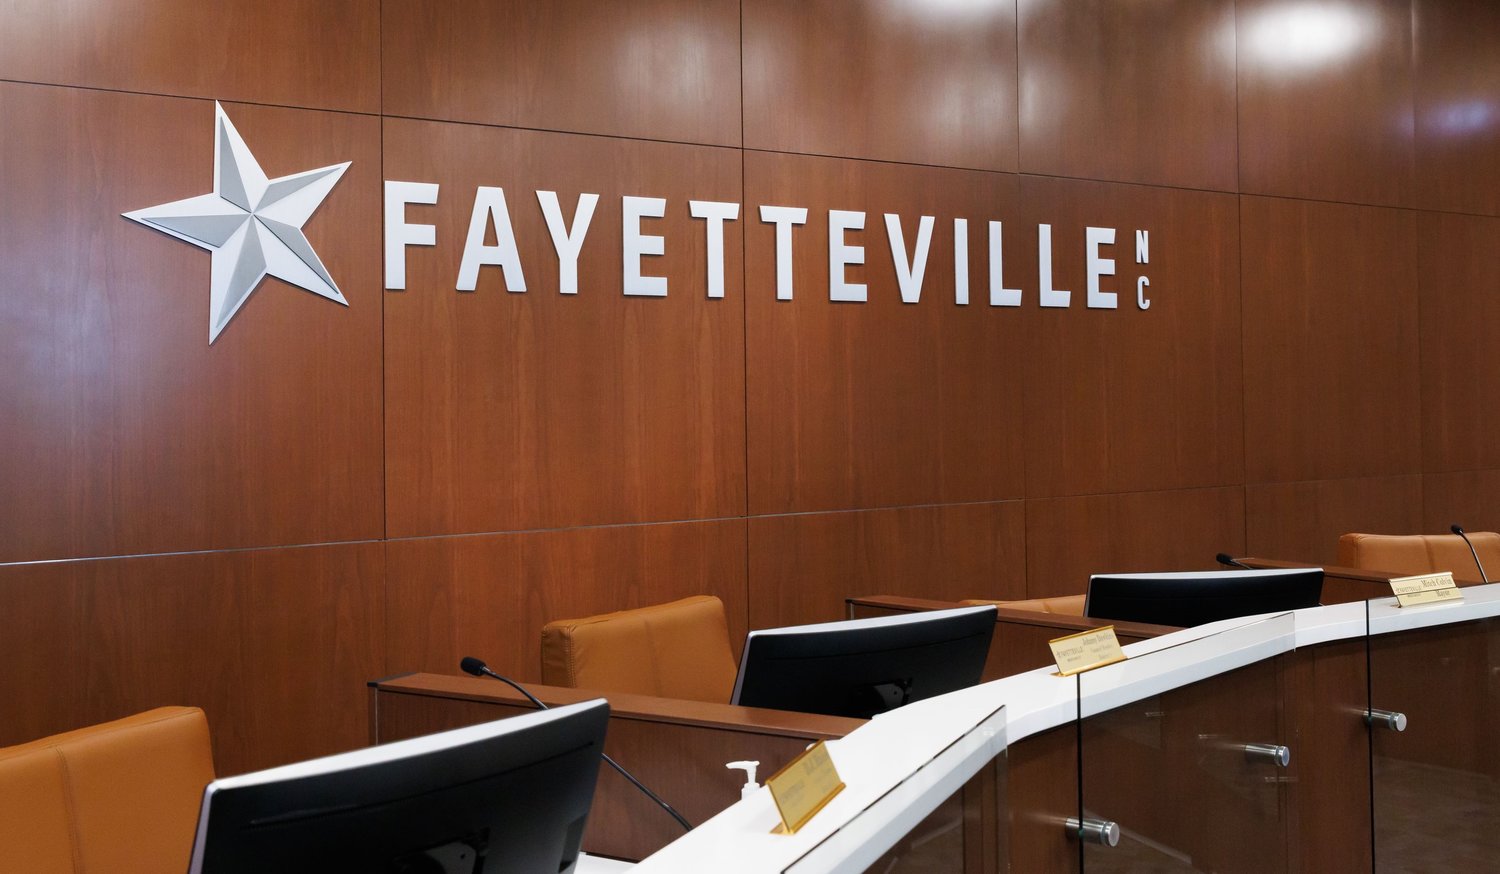 The Fayetteville City Council voted Monday to allow a church to locate closer to an adult business than the current zoning ordinance would allow